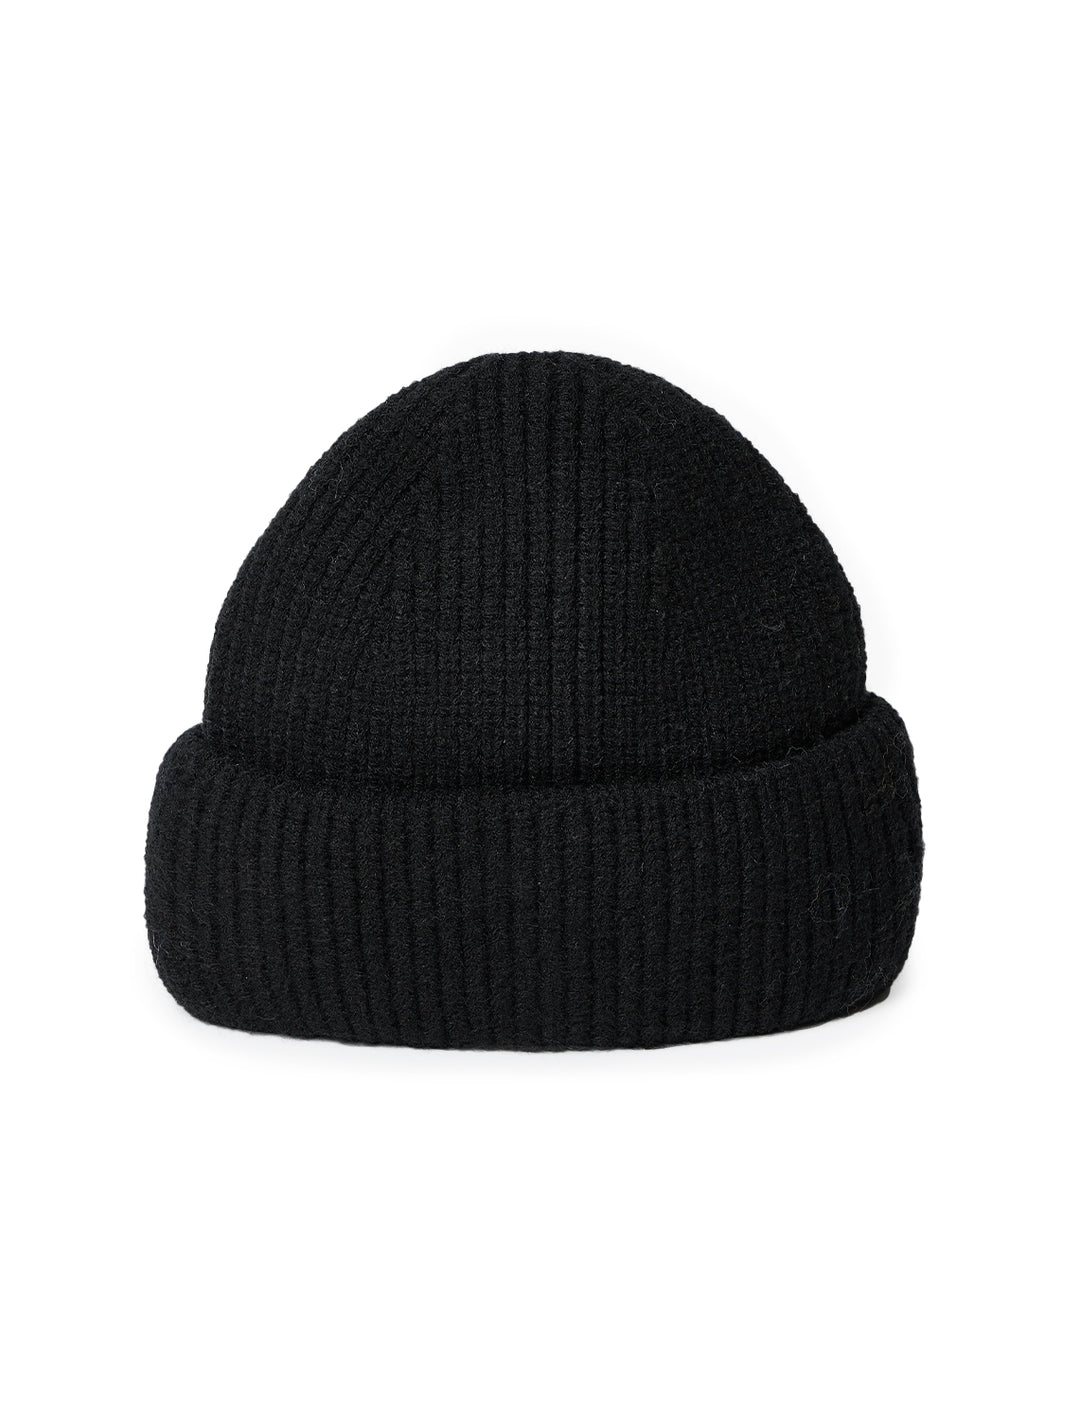 Front view of Hat Attack's Major Beanie in Black.